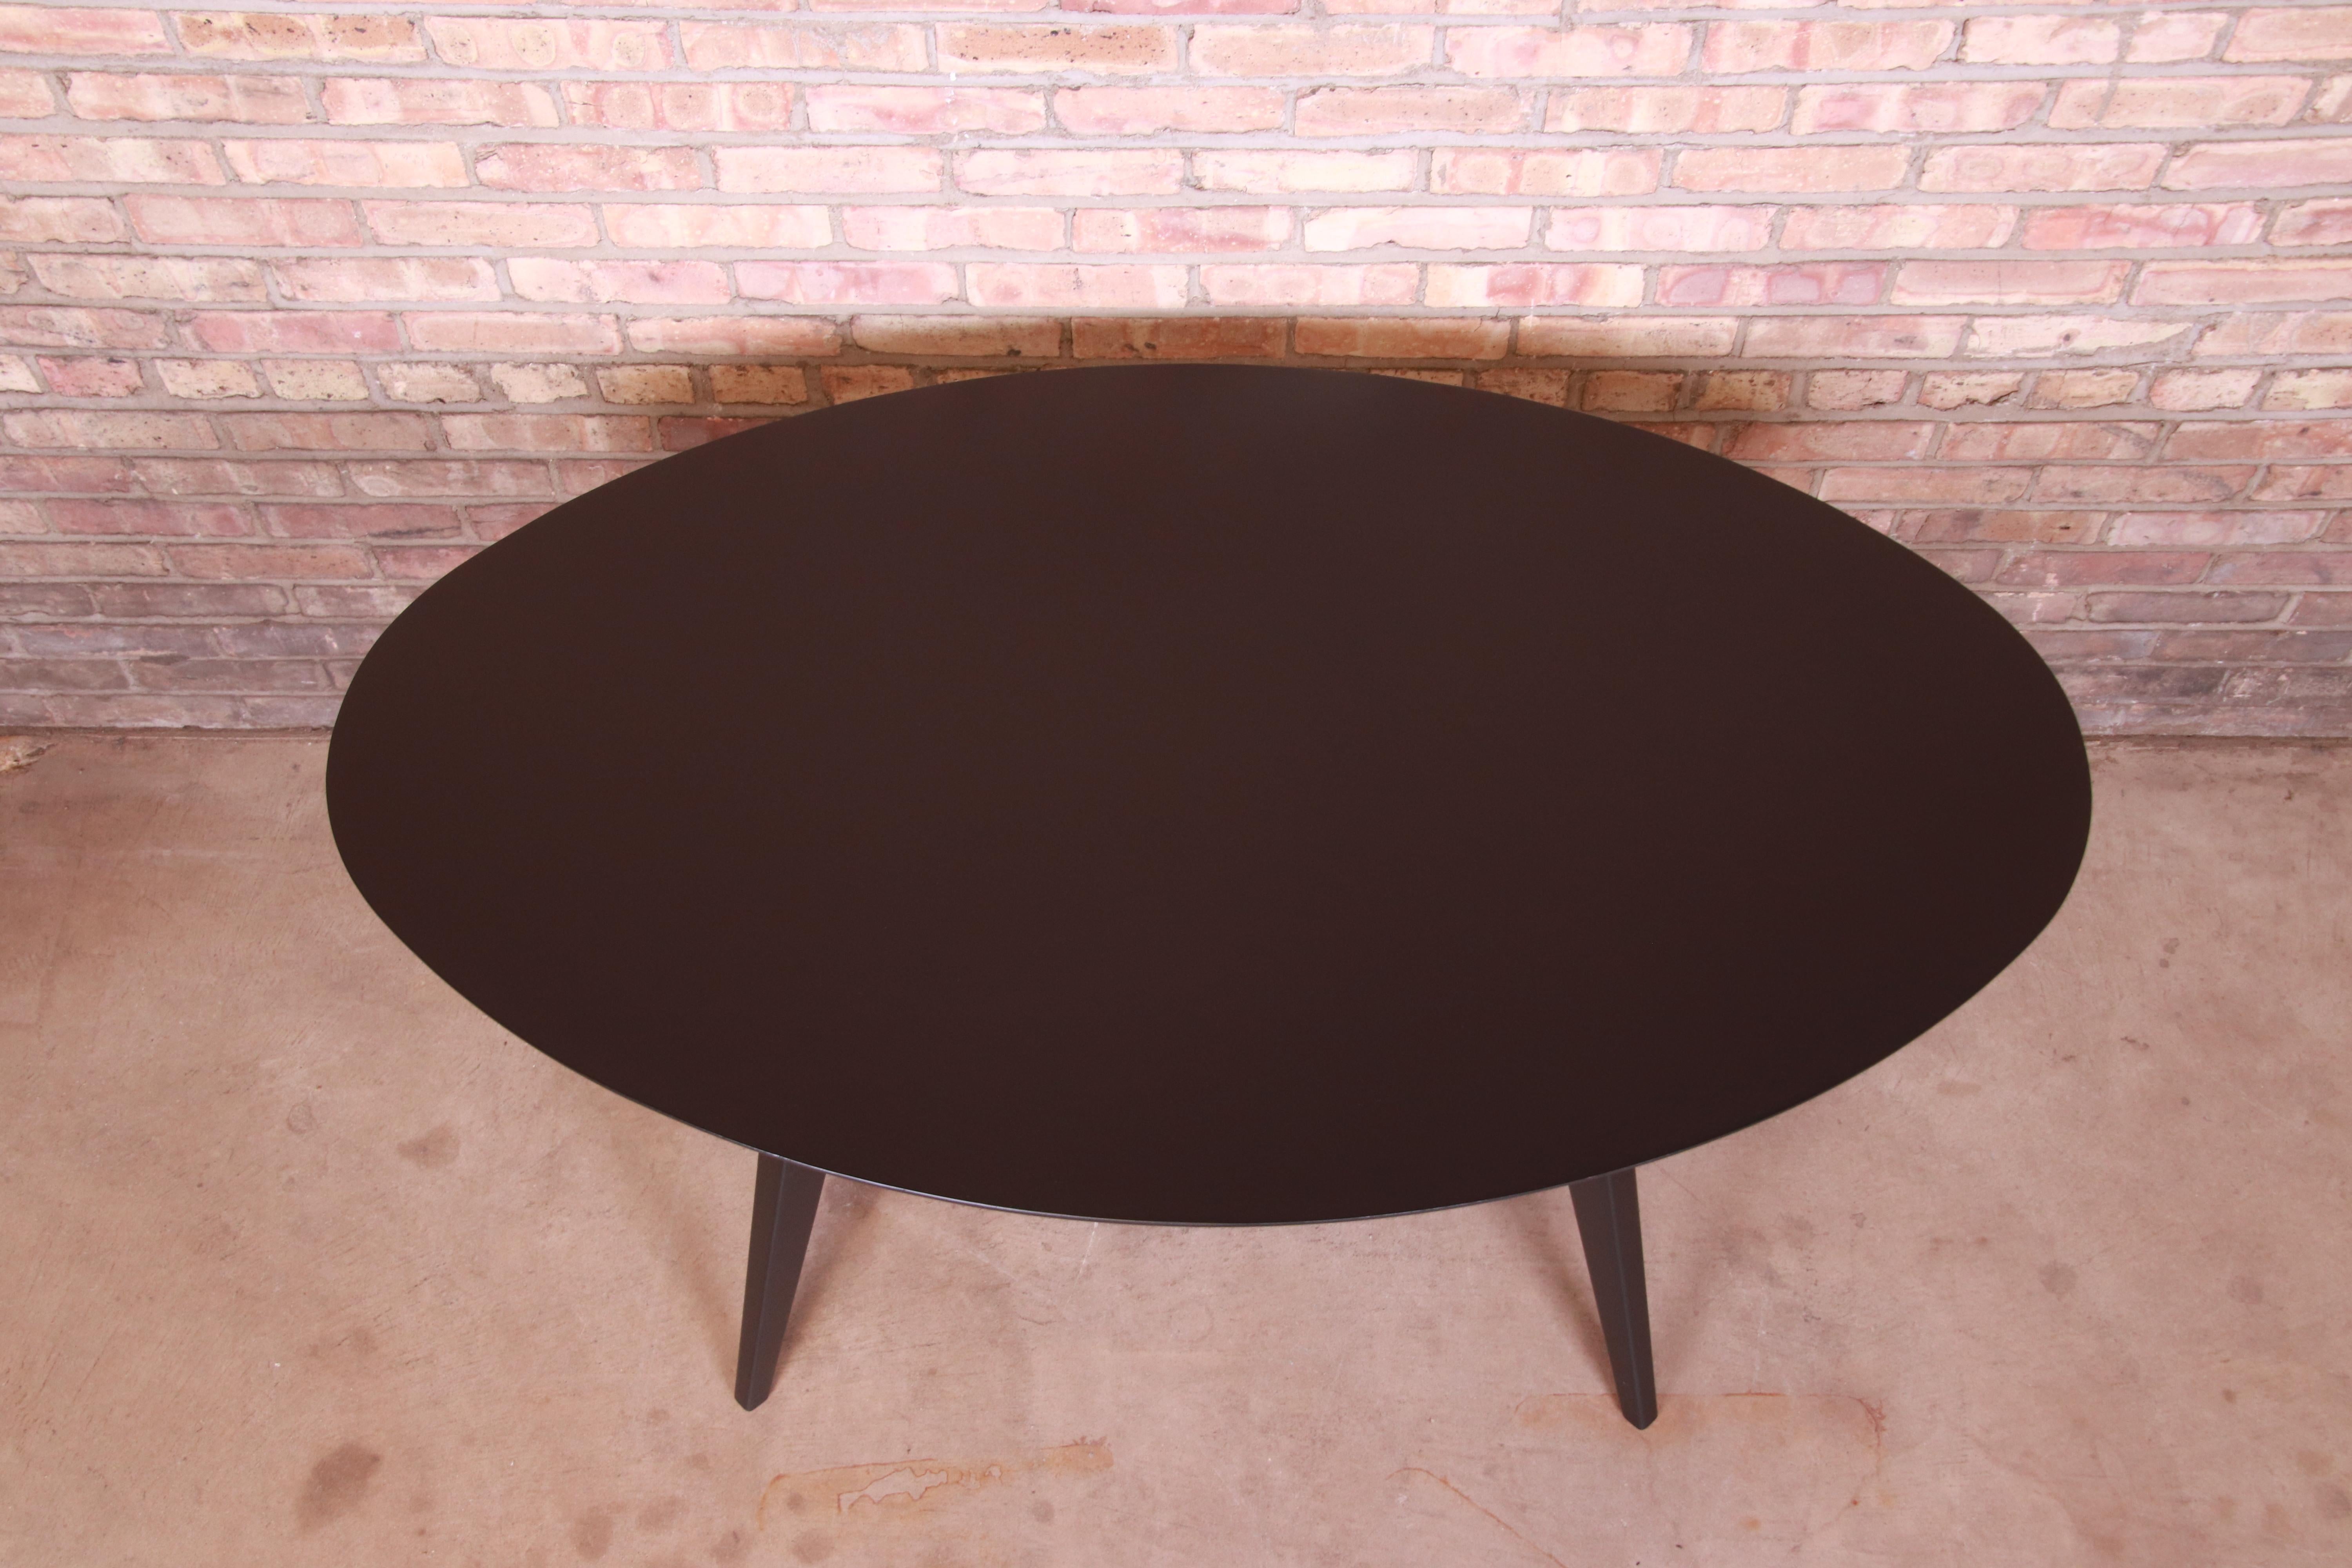 20th Century Jens Risom for Knoll Black Lacquered Dining or Game Table, Newly Refinished